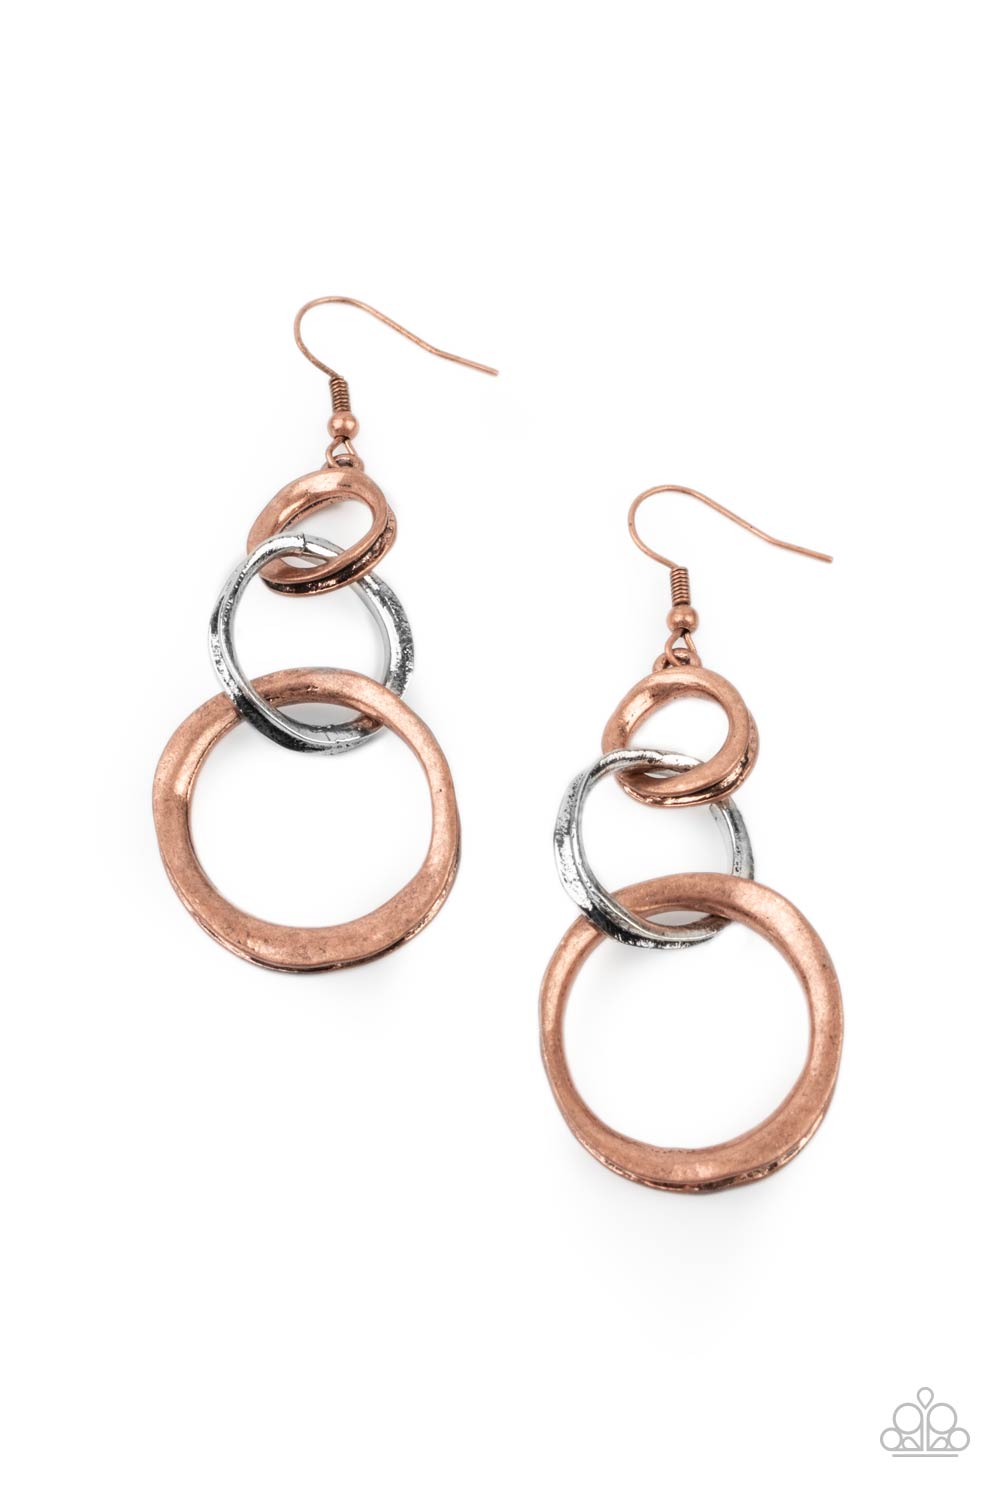 Harmoniously Handcrafted - Copper Earrings - Princess Glam Shop